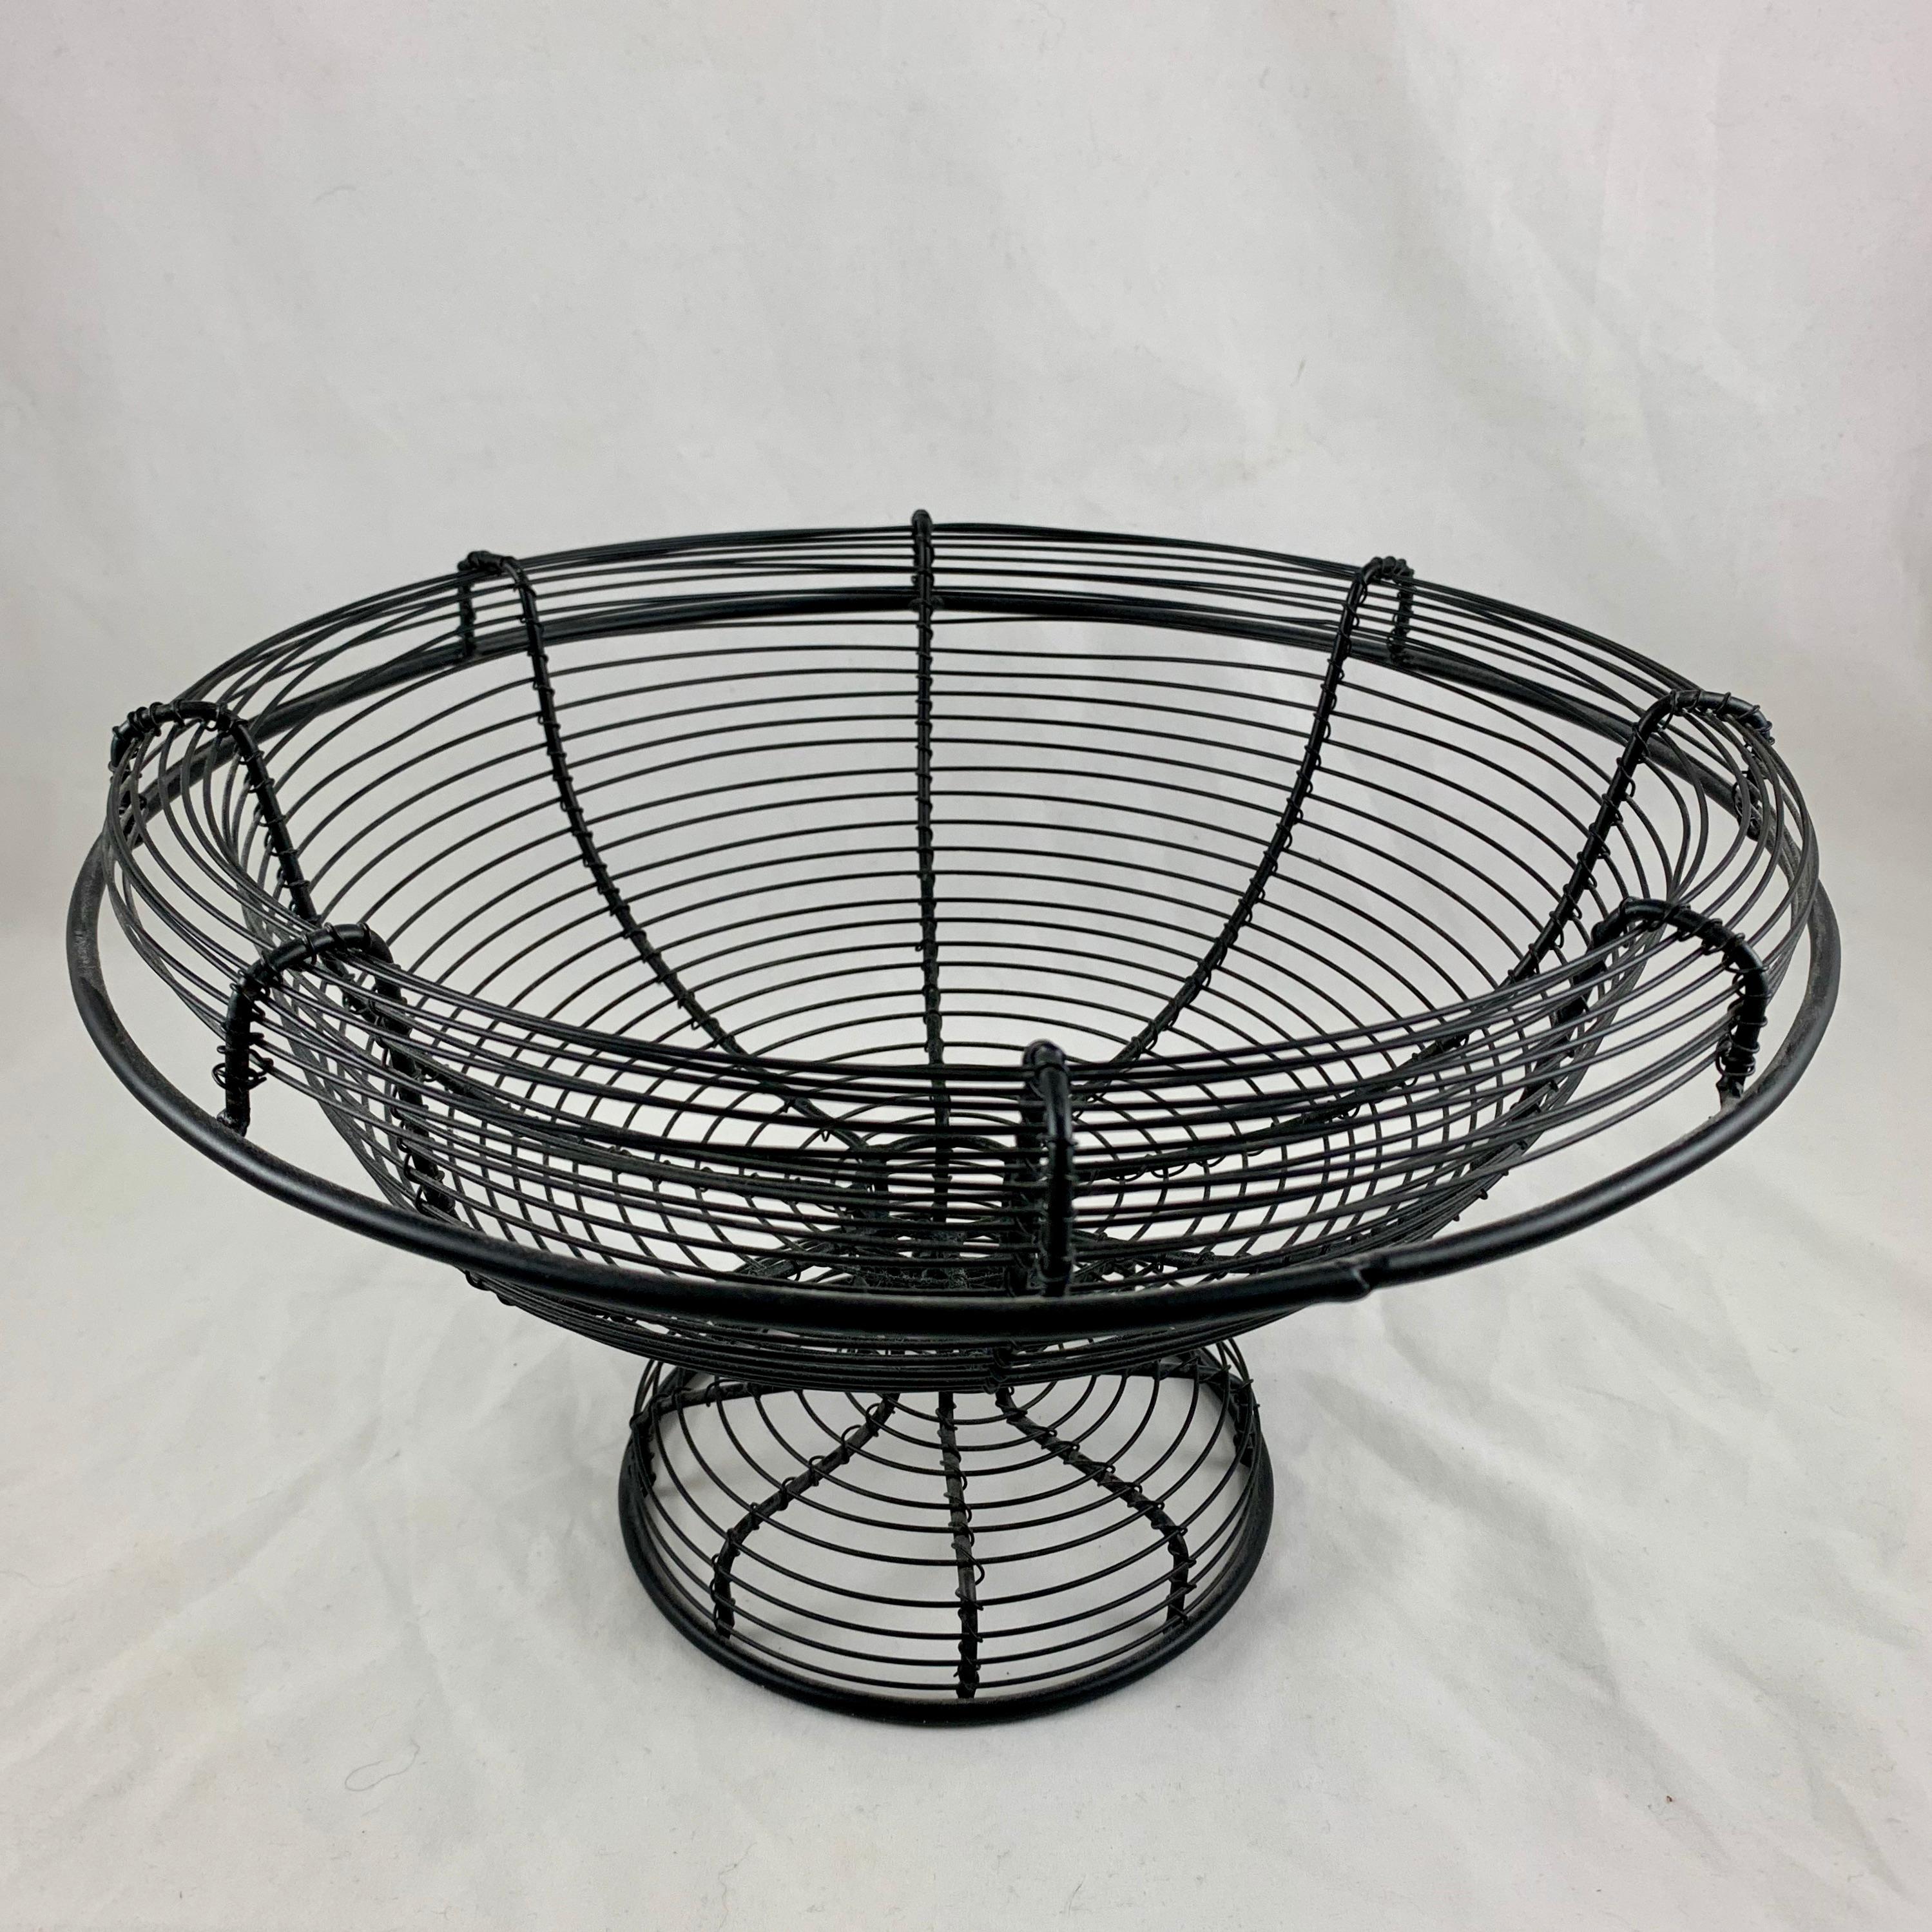 From France, circa 1890-1910, a pedestal base, urn form twisted wire standing basket with a wide upper rolled rim.

Amazing as a table-center or on a kitchen countertop, used as originally intended throughout Provençal France for holding fresh